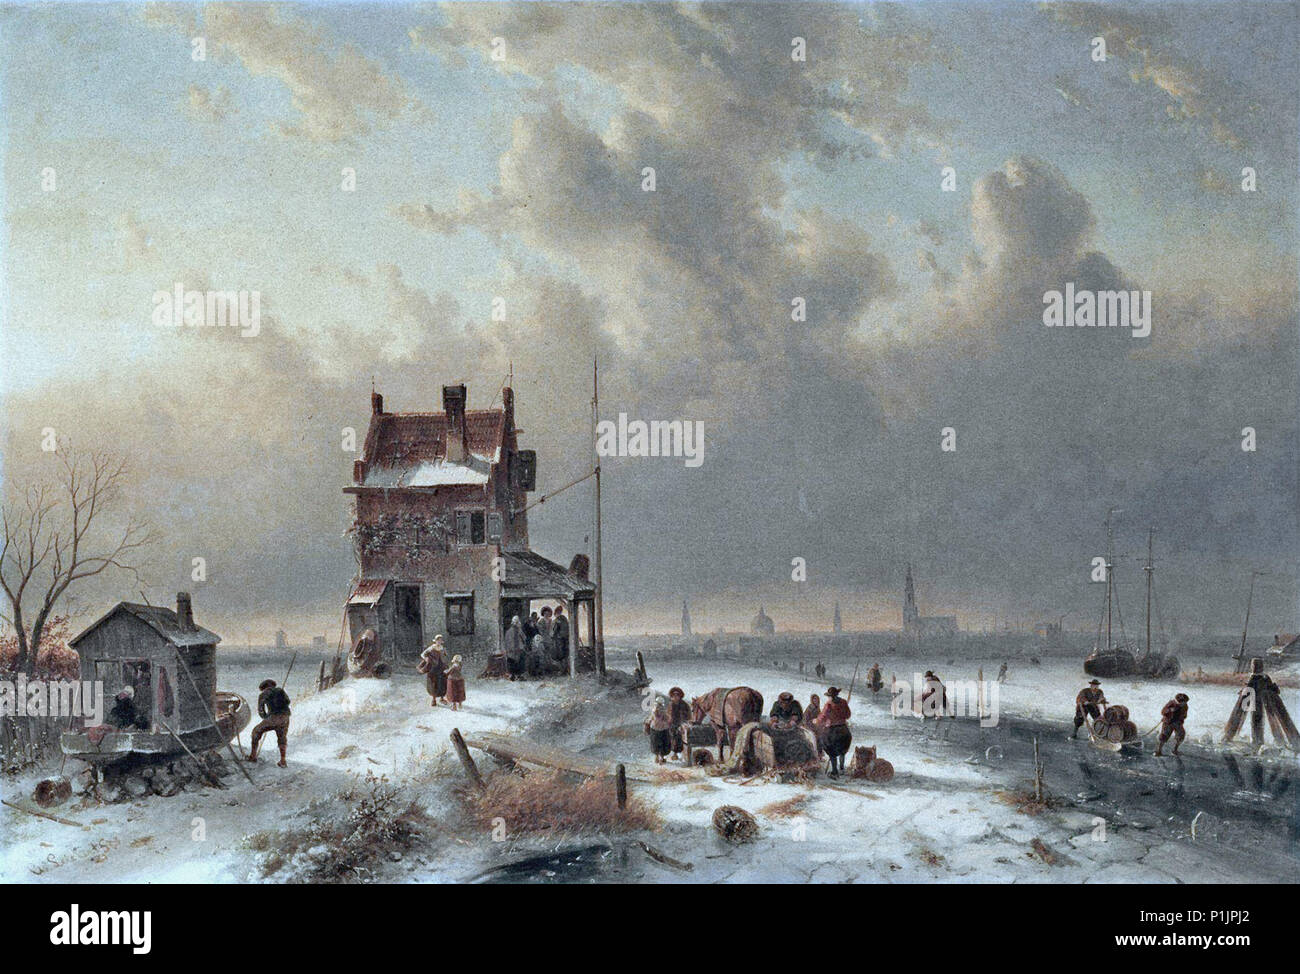 Leickert  Charles Henri Joseph - Busy Townsfolk on the Ice  Amsterdam in the Distance Stock Photo